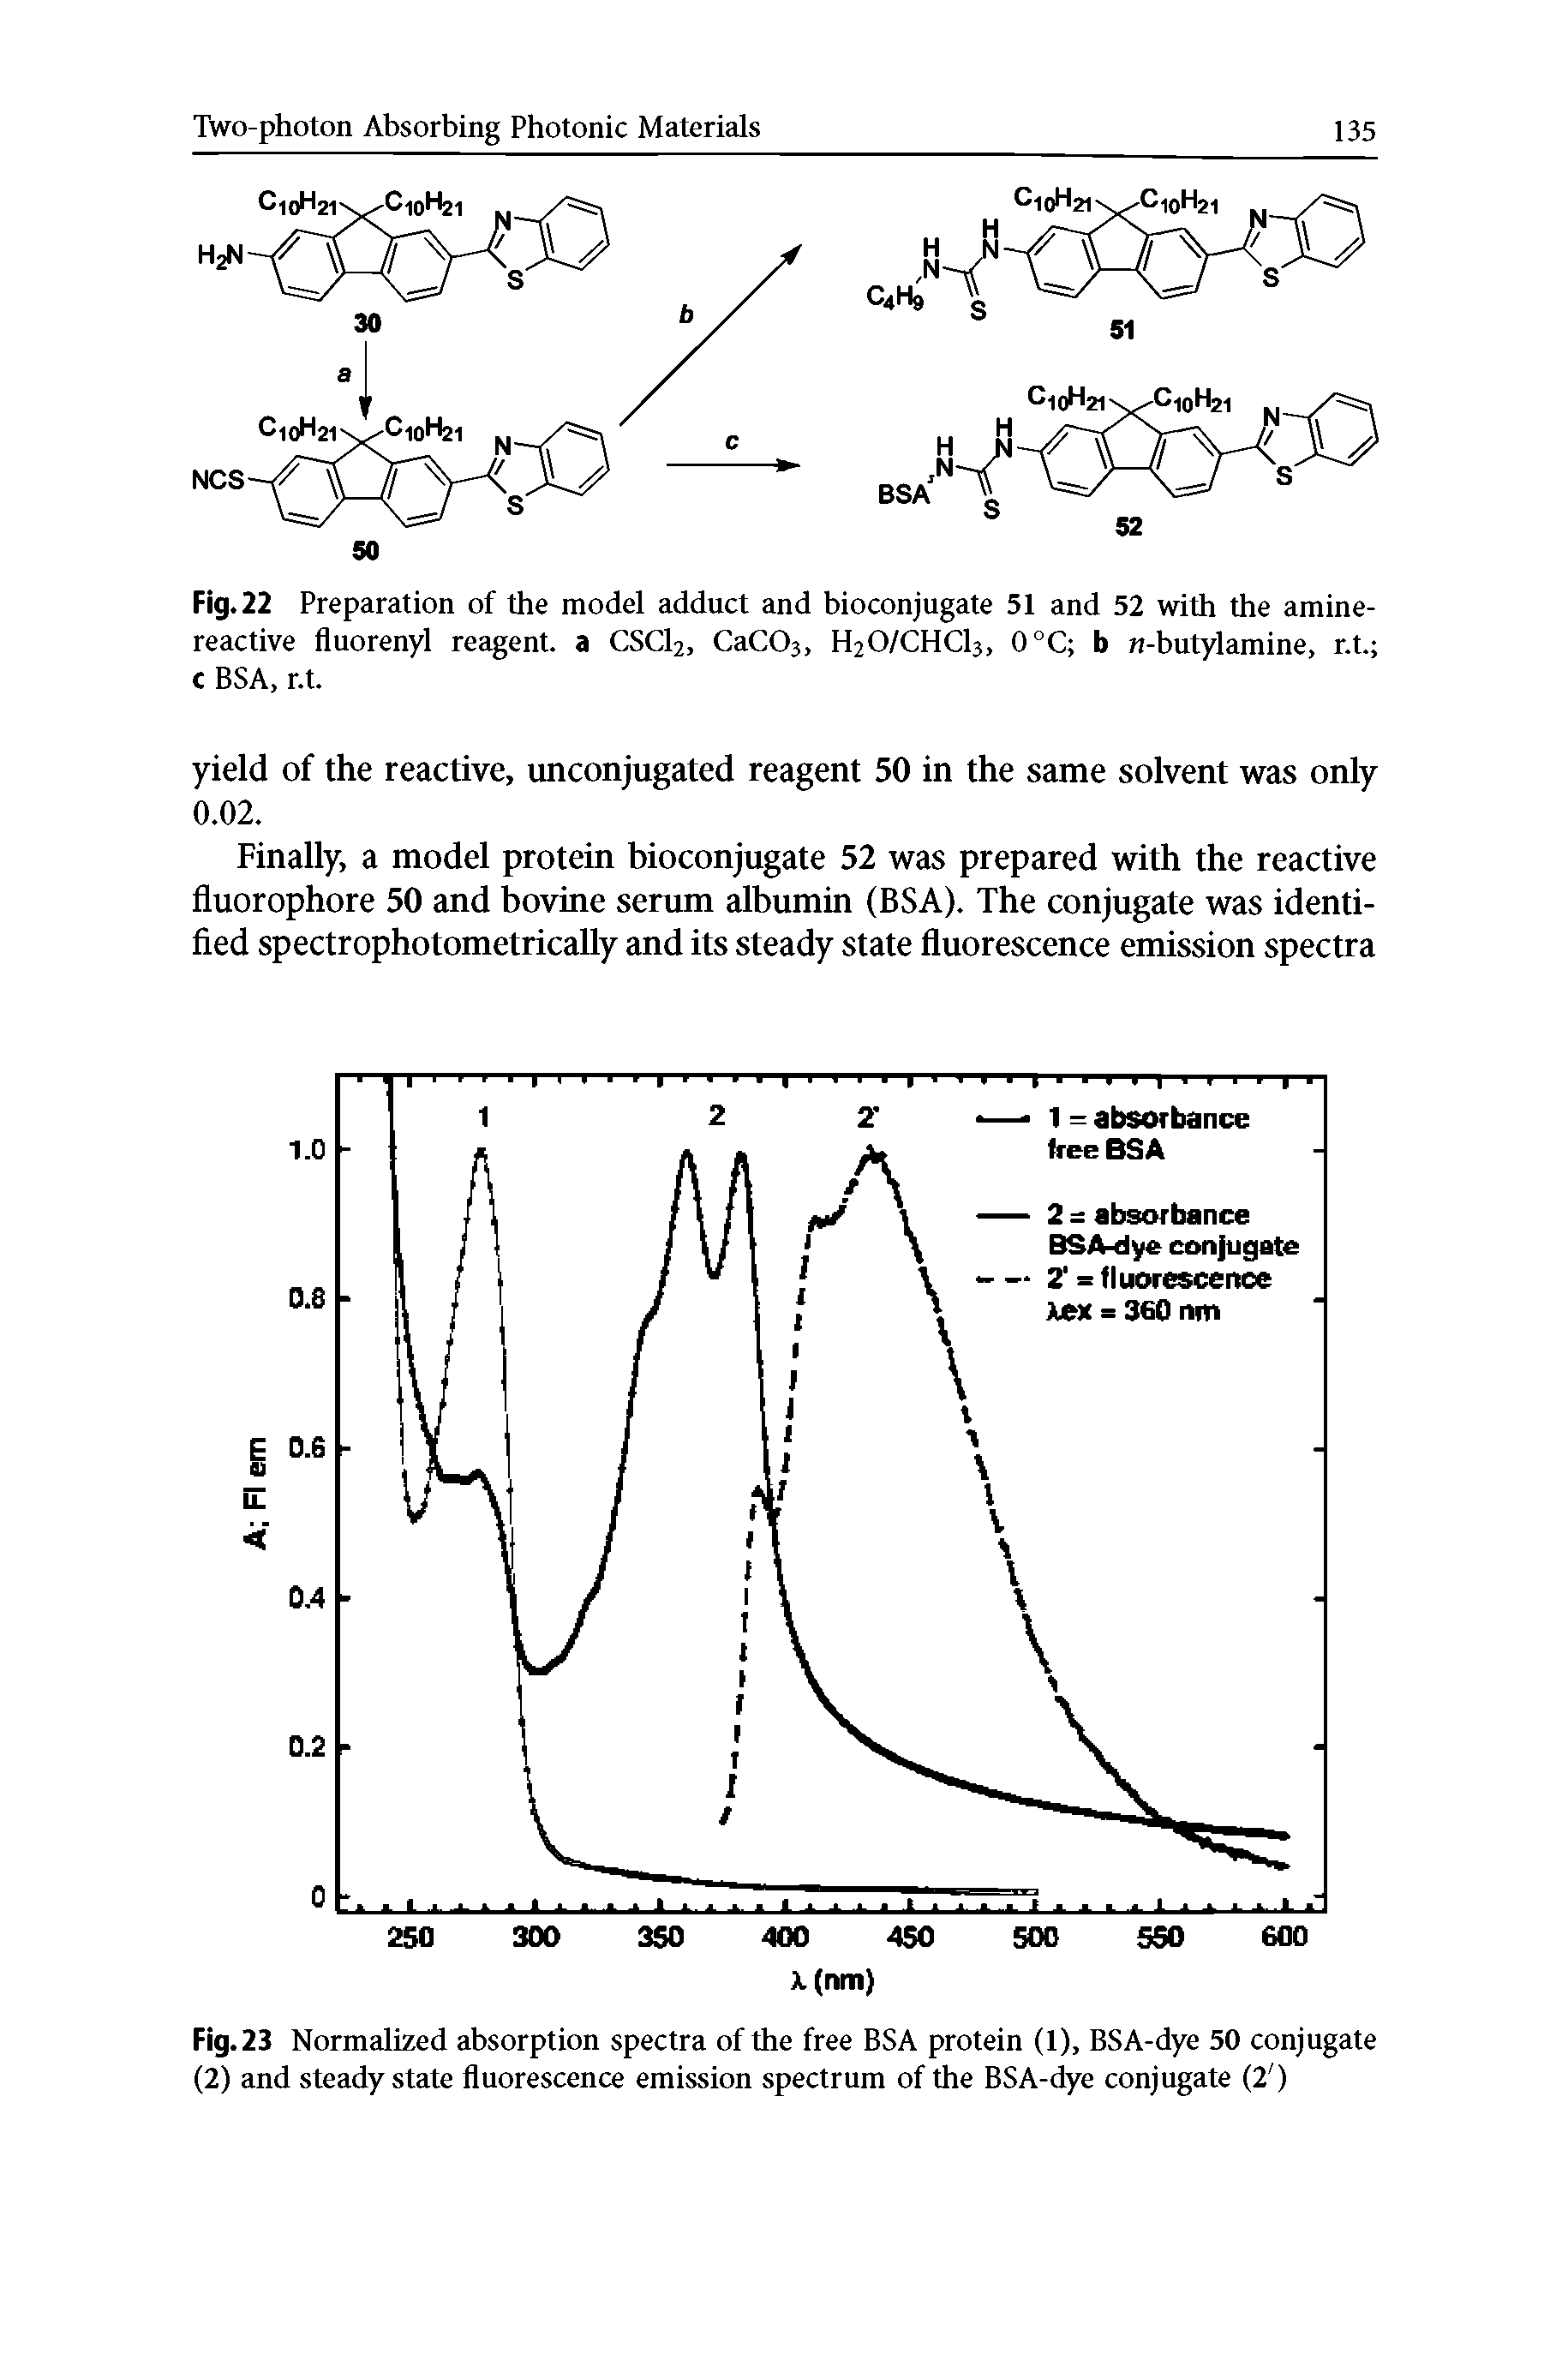 Fig. 23 Normalized absorption spectra of the free BSA protein (1), BSA-dye 50 conjugate (2) and steady state fluorescence emission spectrum of the BSA-dye conjugate (2 )...